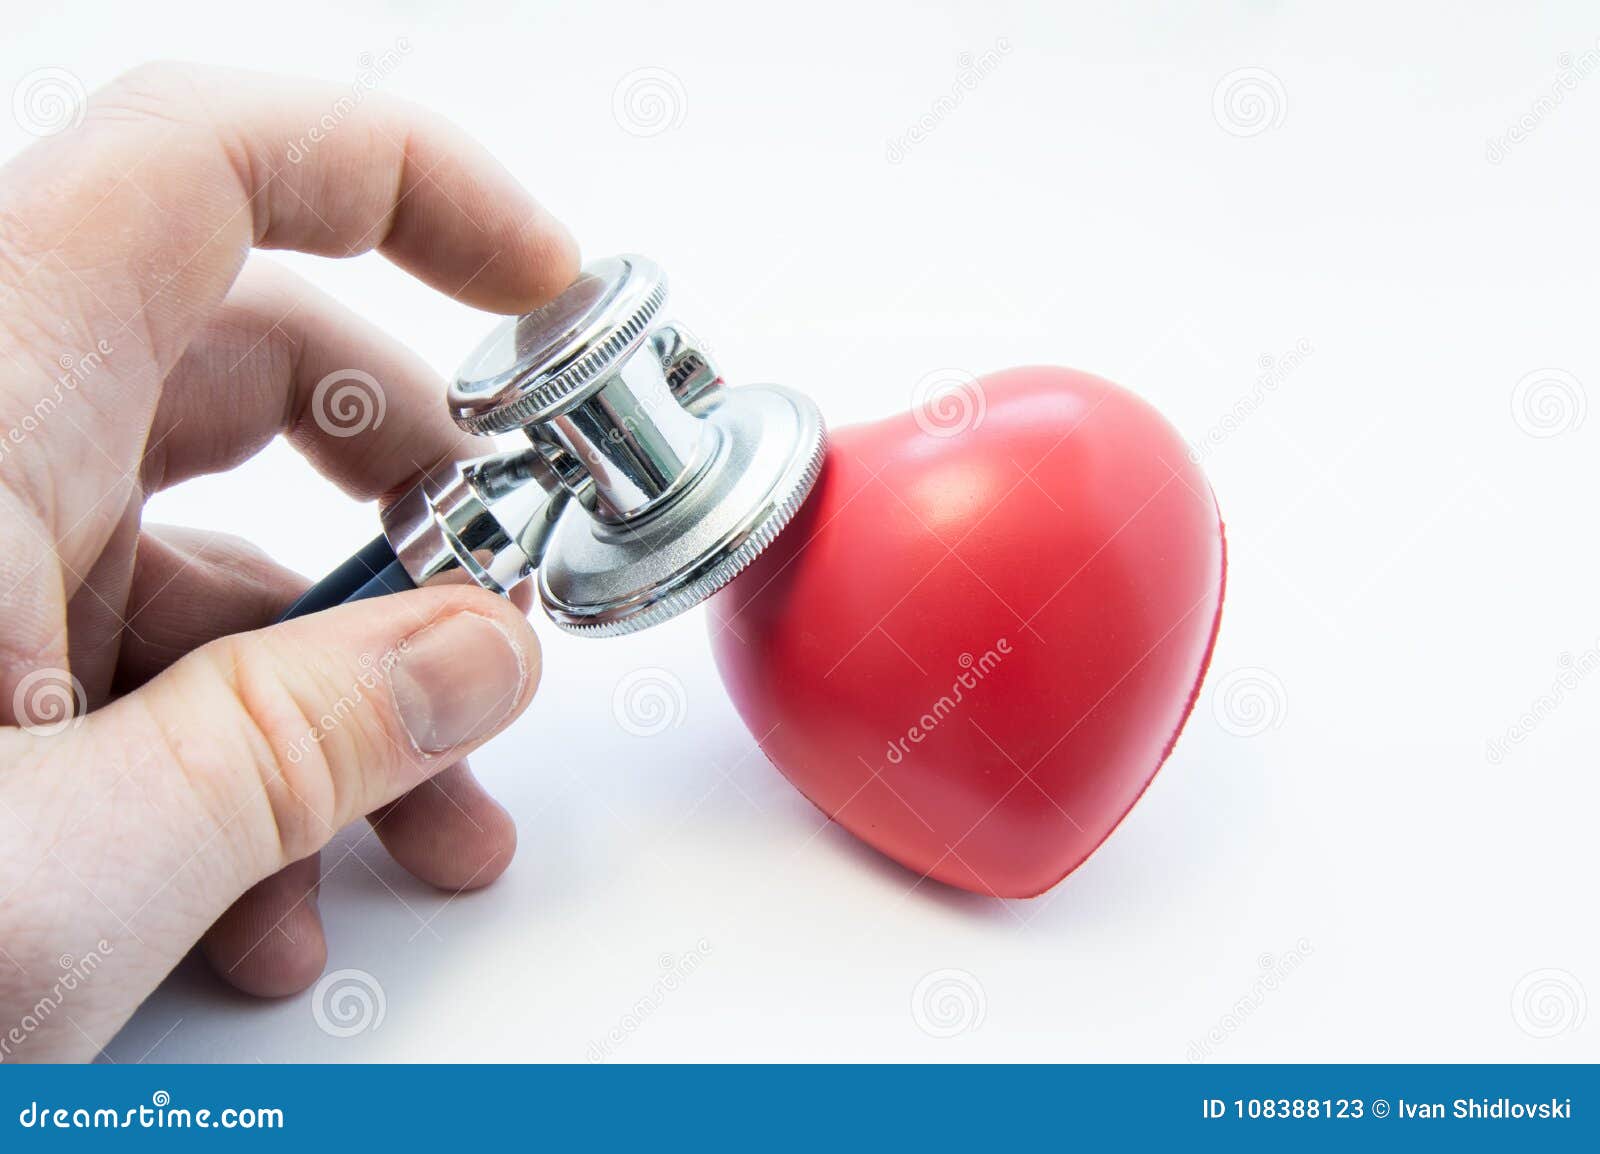 doctor holding stethoscope in his hand, examines heart  for presence of diseases of cardiovascular system. photo for use in c